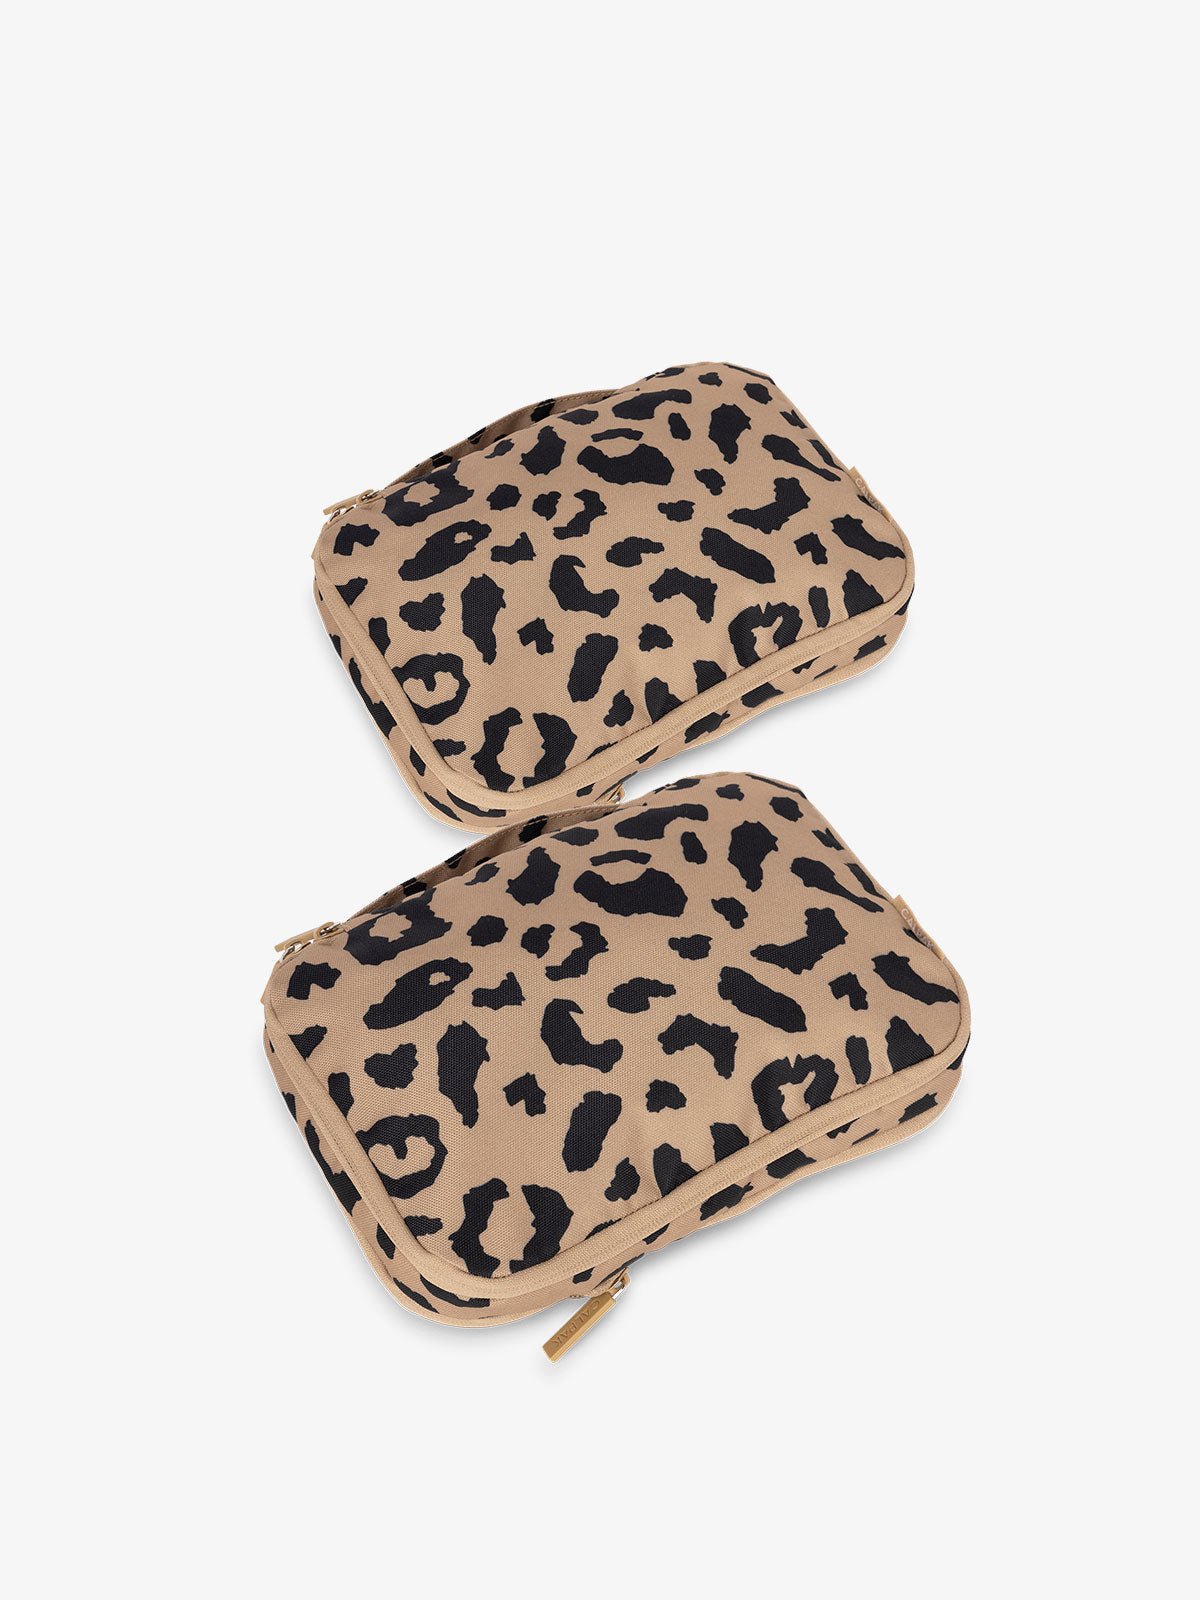 CALPAK small compression packing cubes in cheetah